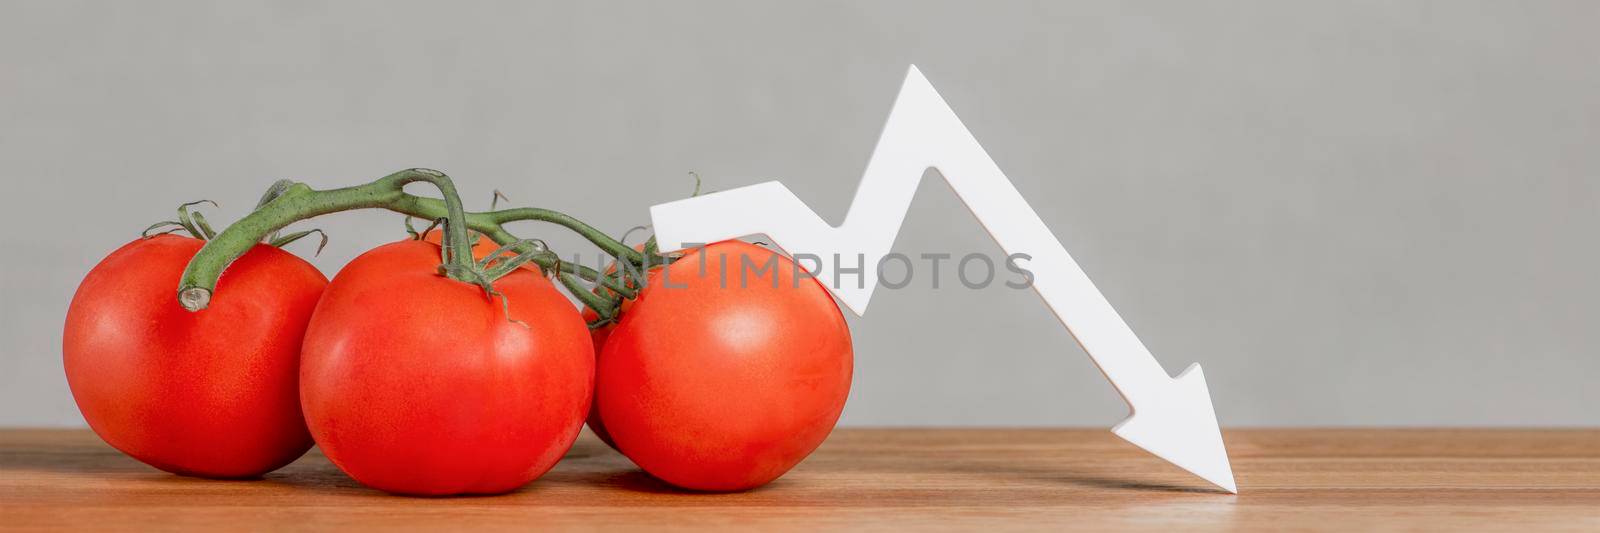 The price of tomatoes and vegetables. Bad vegetable harvest. Fresh red ripe tomatoes with twigs on the table. Graph chart points down